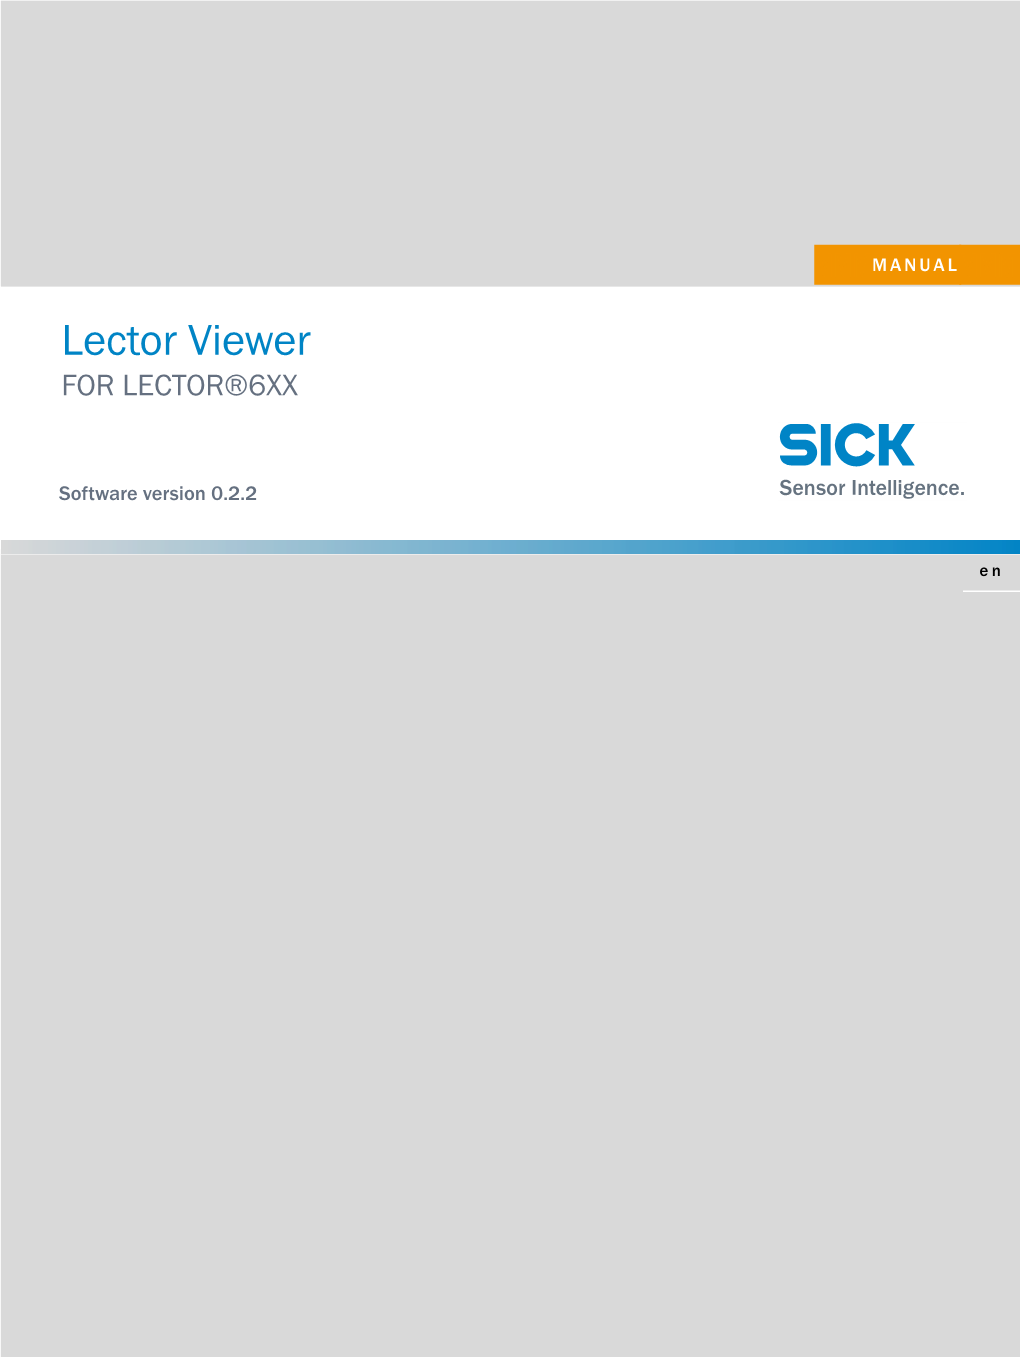 Lector Viewer for LECTOR®6XX